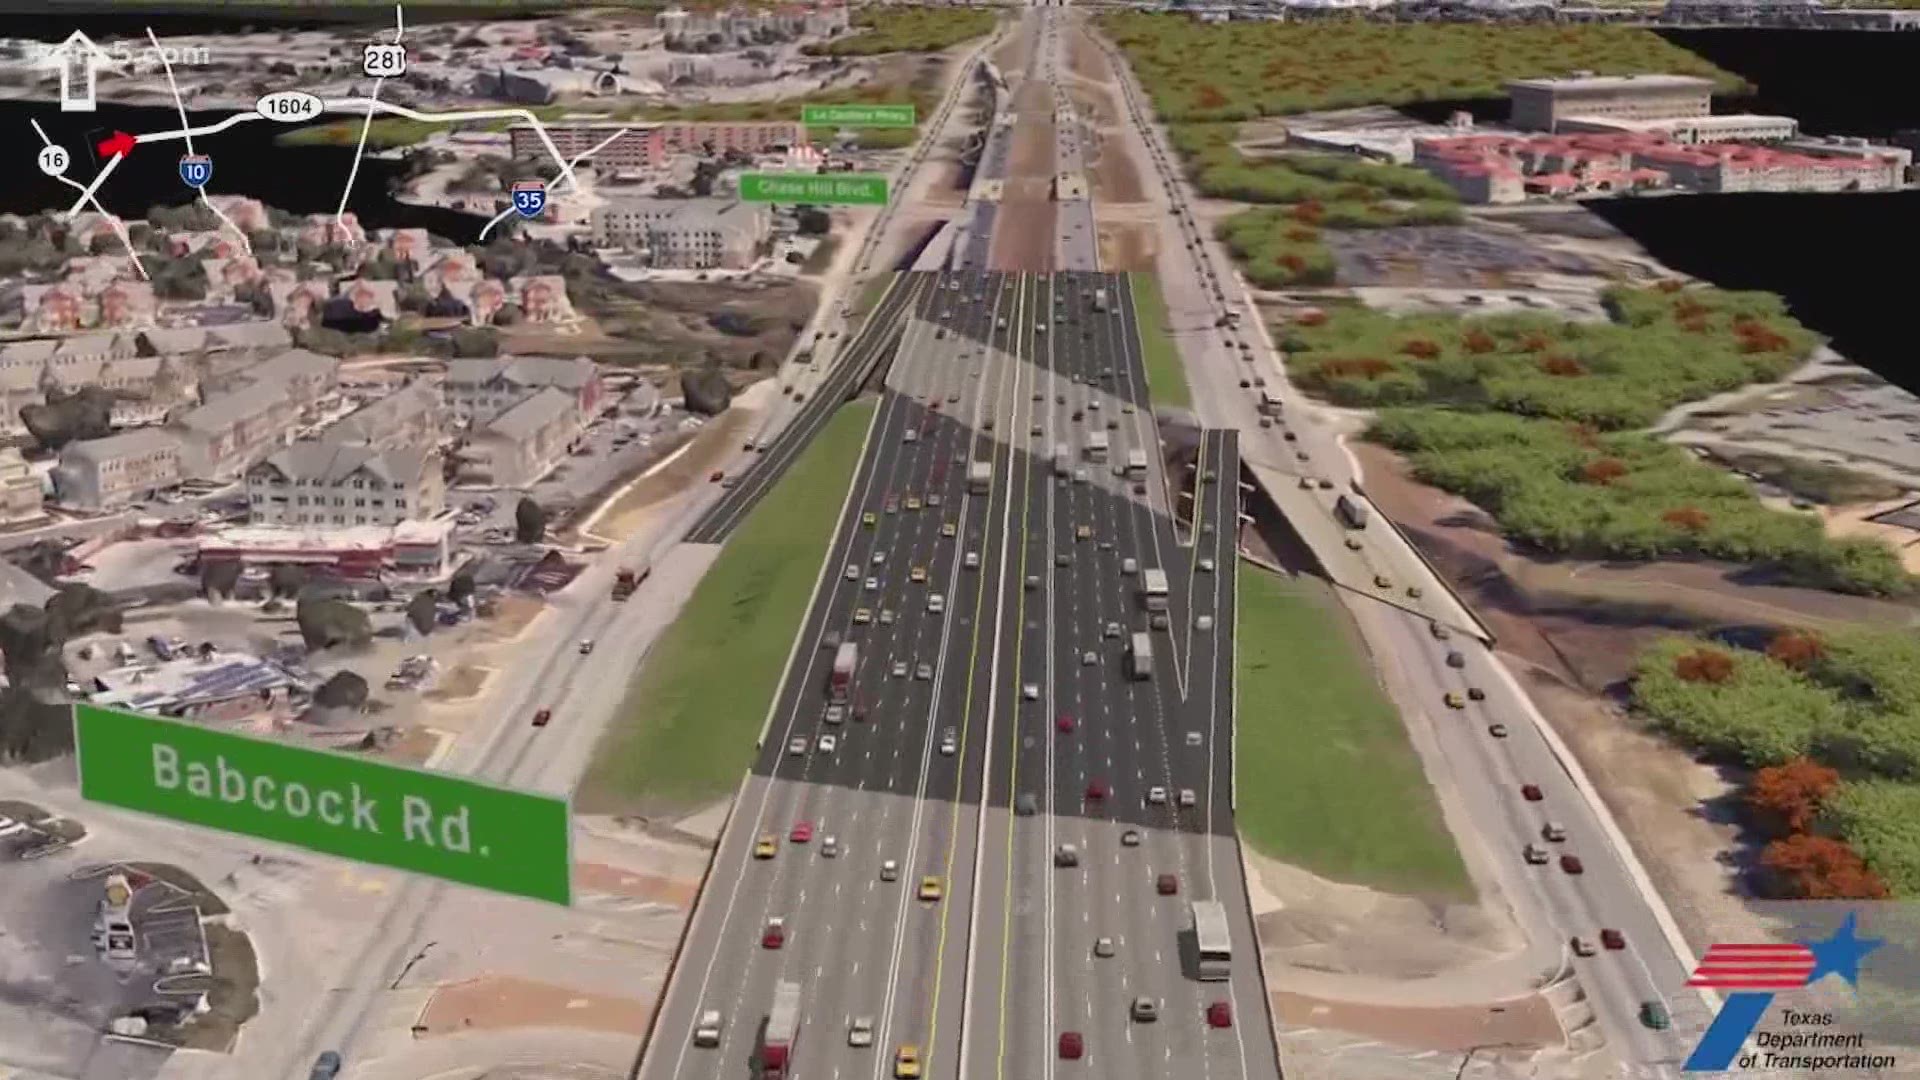 The project runs 23 miles from the northwest side at Bandera Road to the northeast side at I-35 – changing it from a four-lane expressway to a 10-lane expressway.